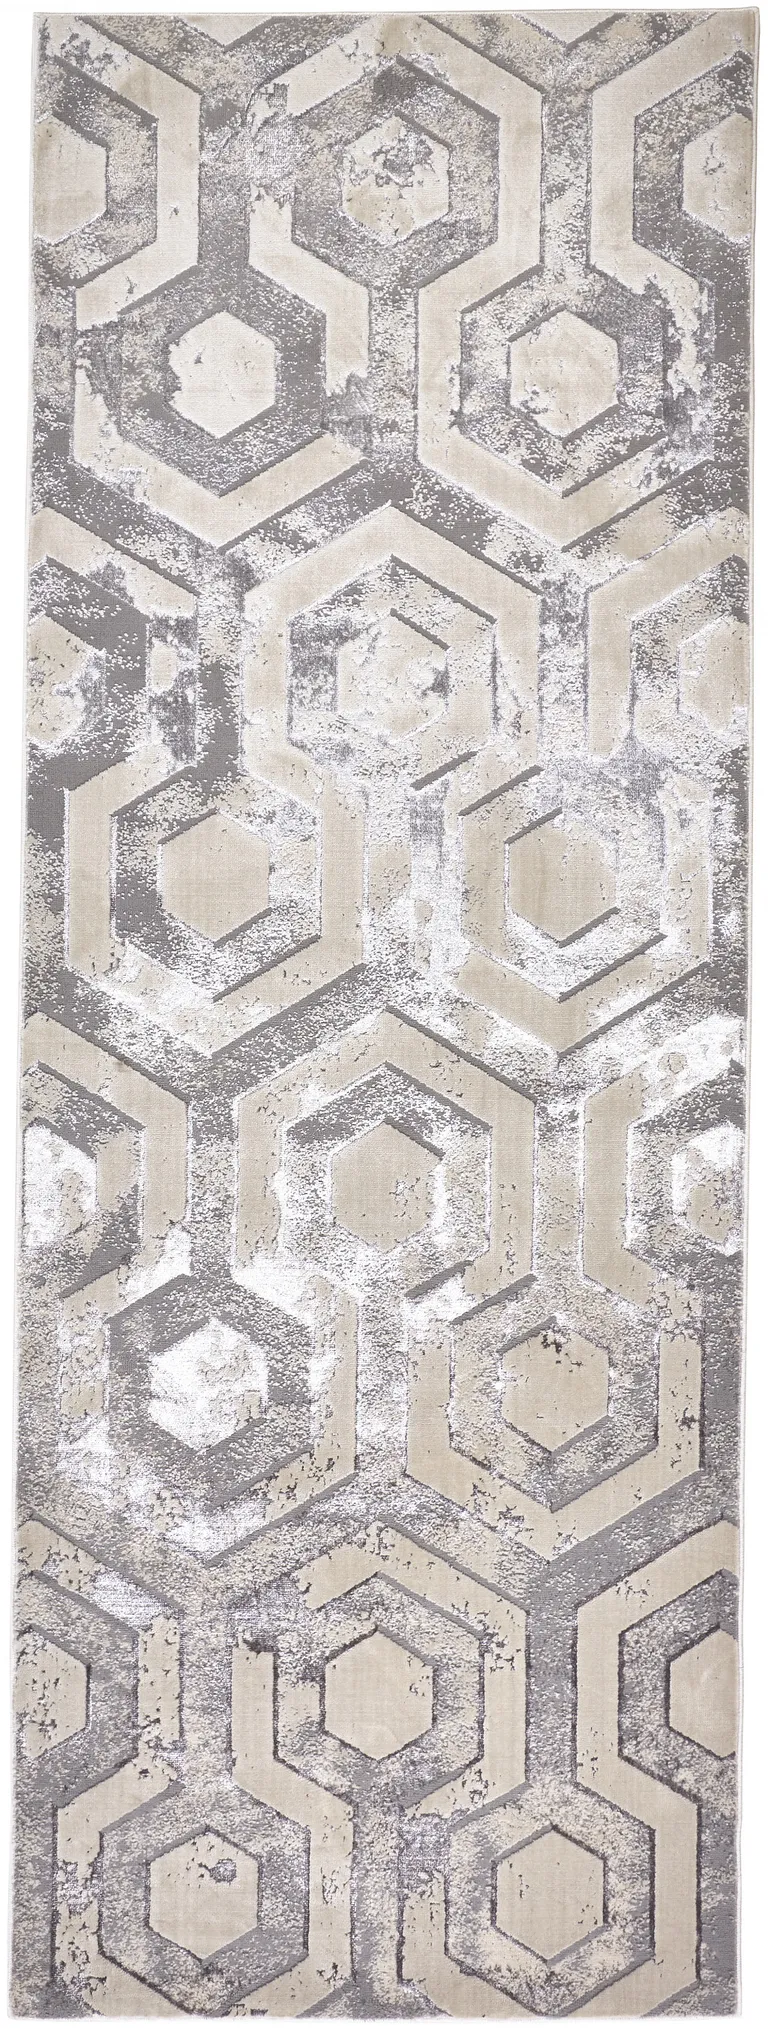 8' Gray Taupe And Silver Abstract Runner Rug Photo 1